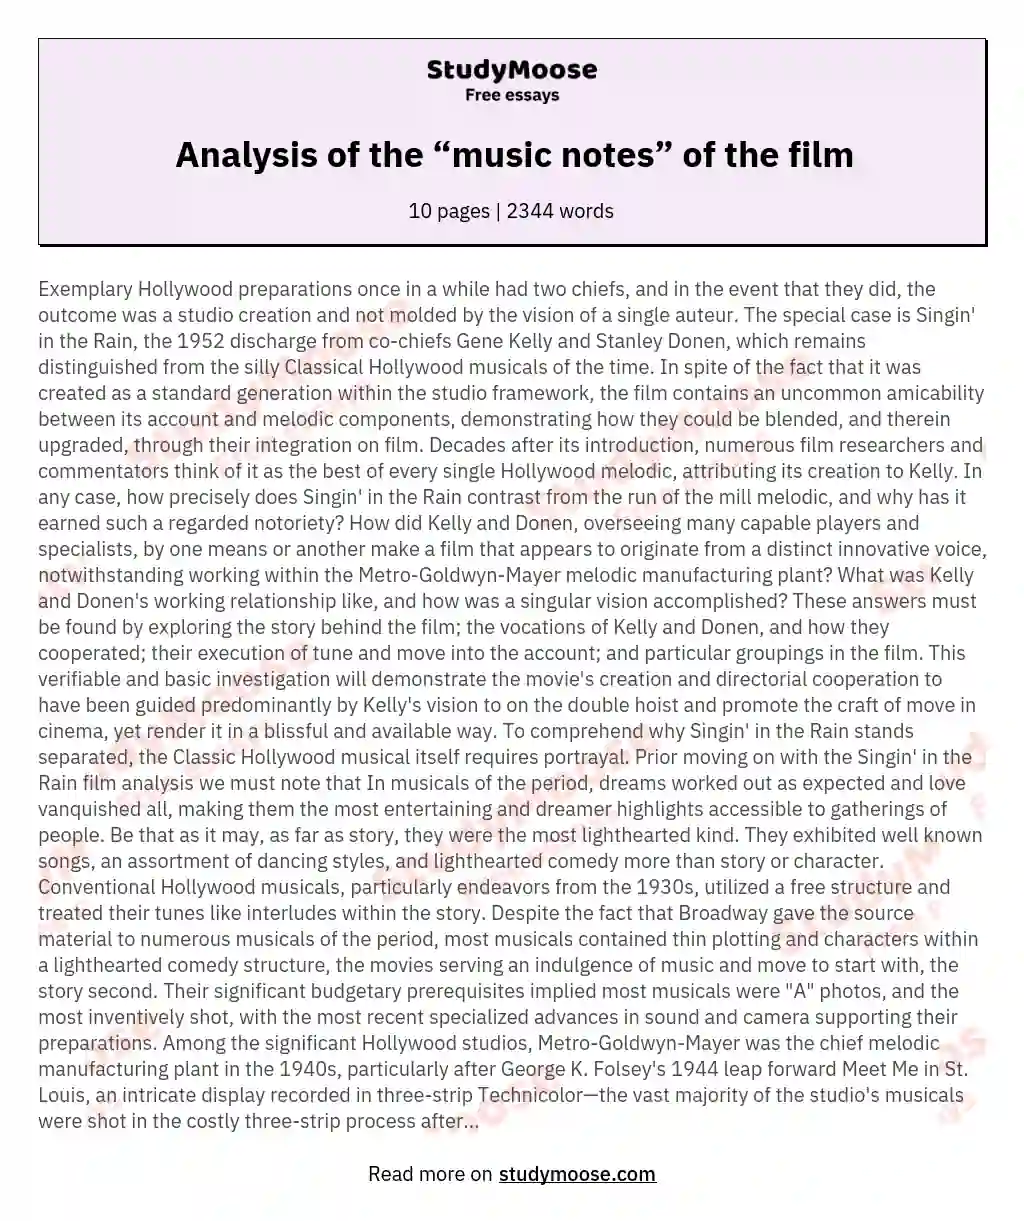 Analysis of the “music notes” of the film